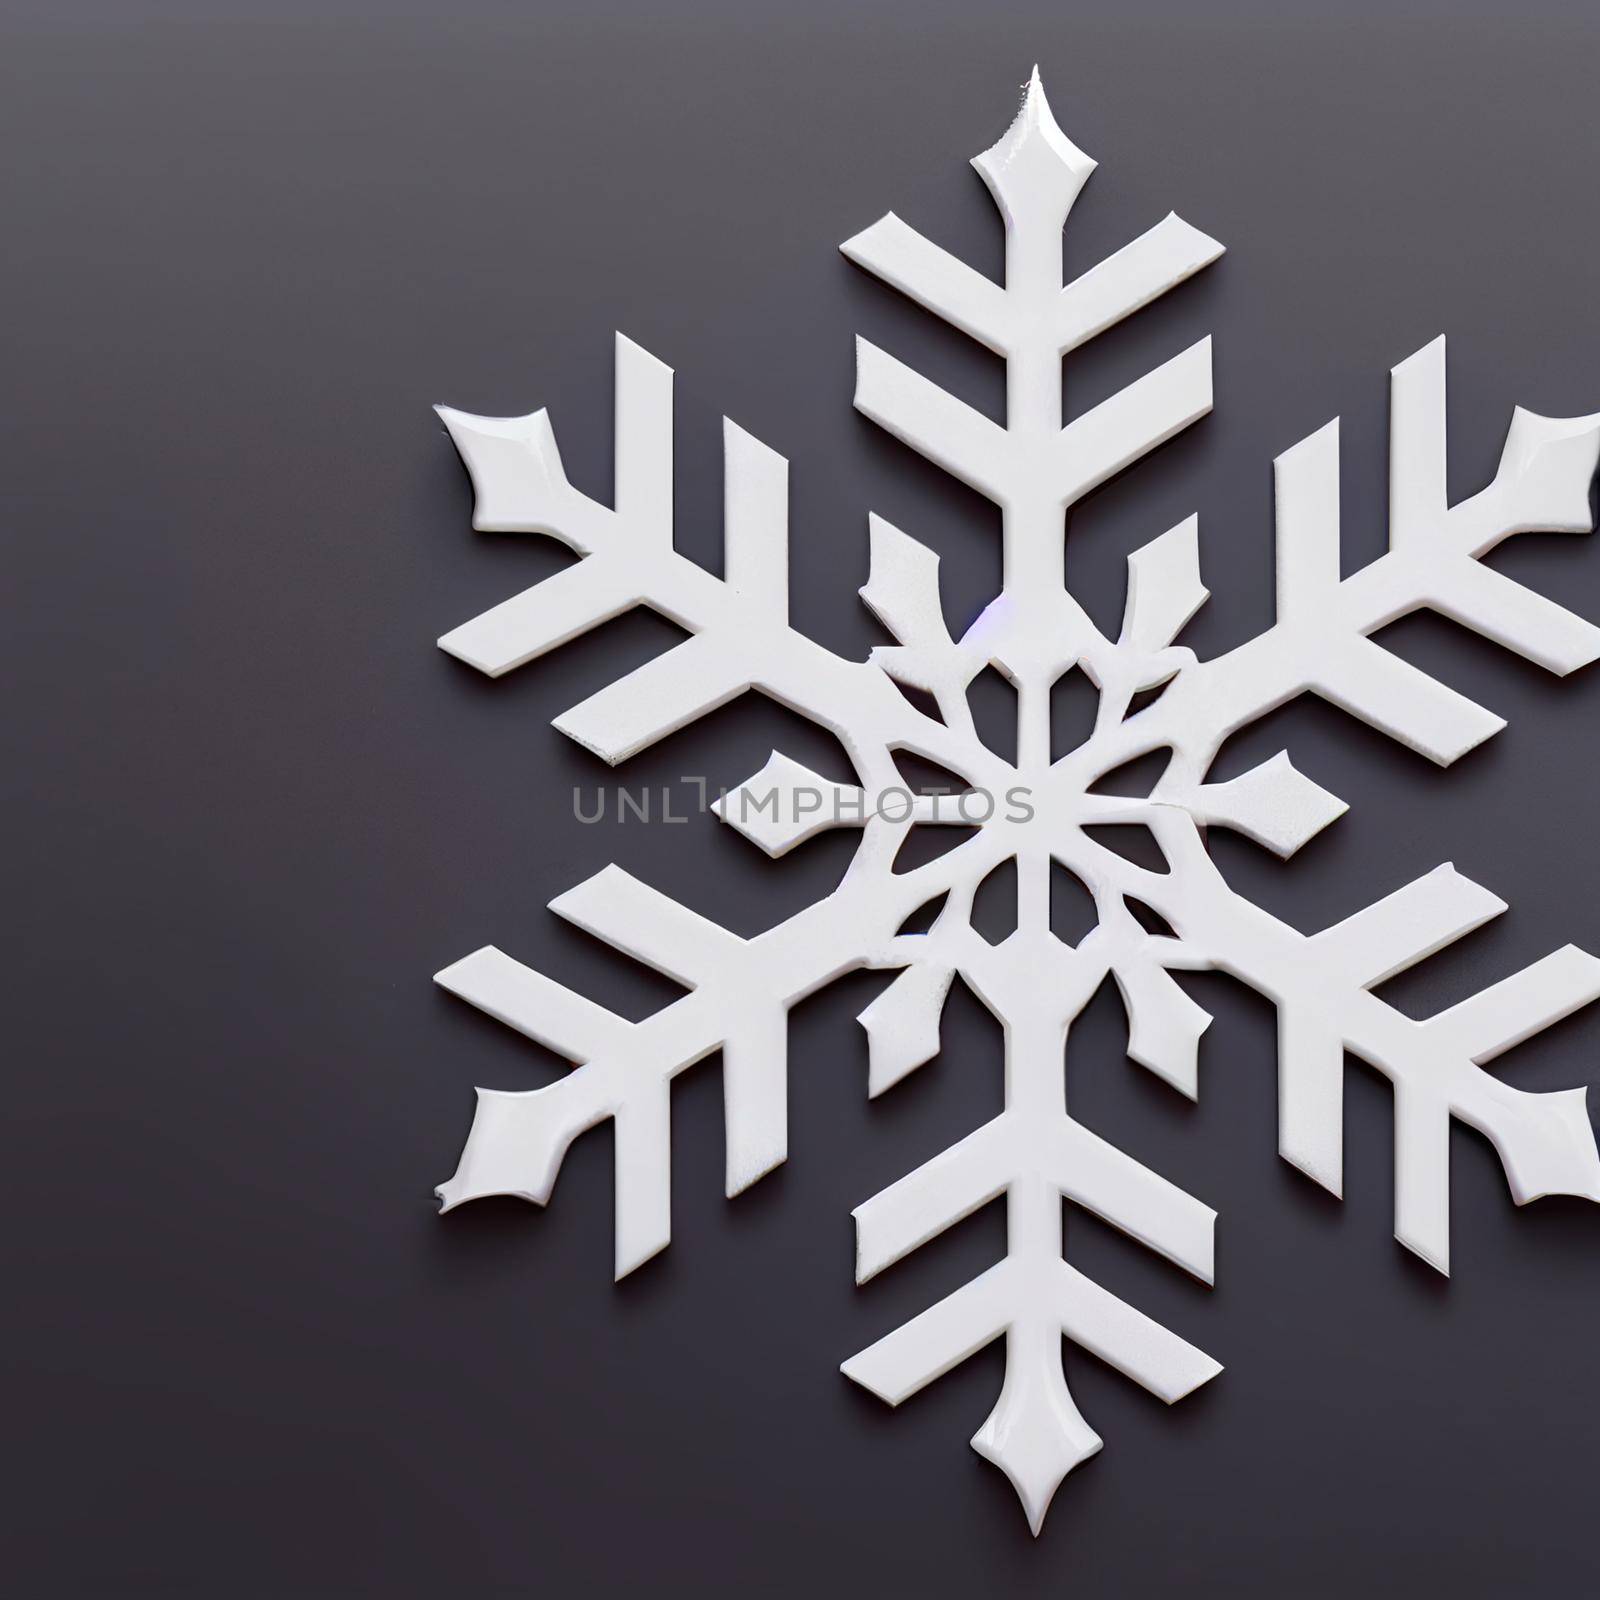 Design image of a snowflake by NeuroSky